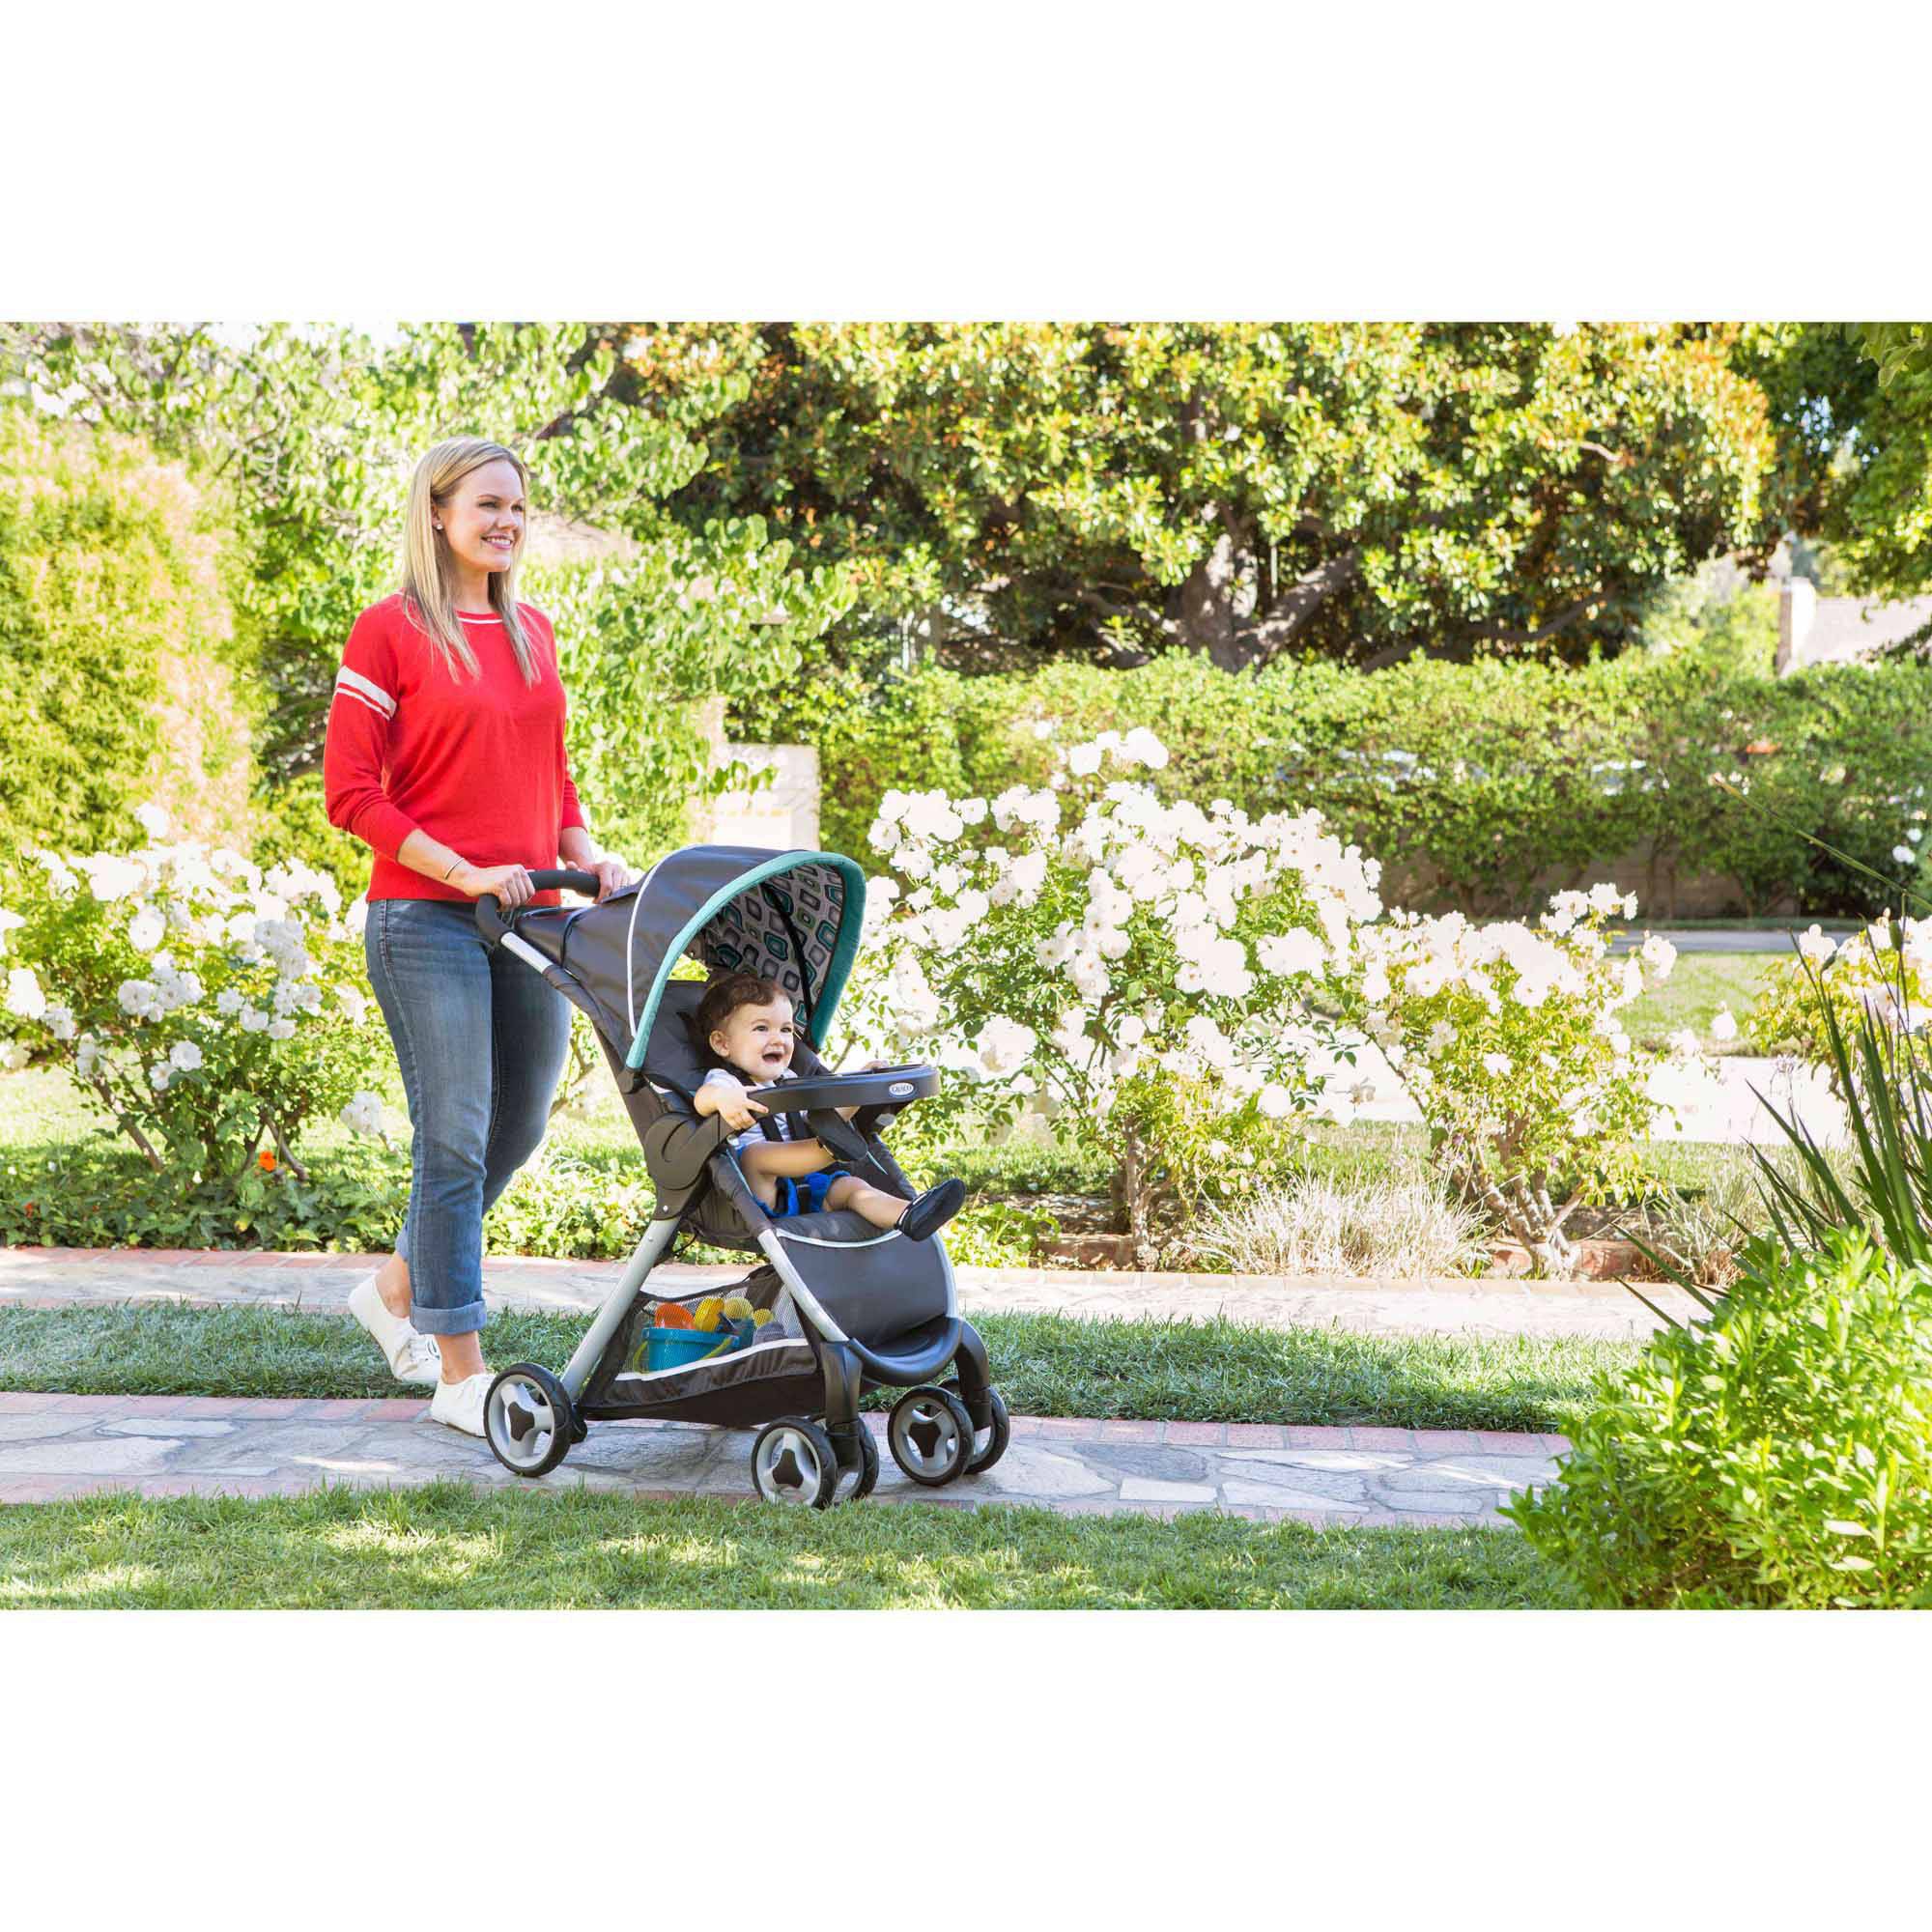 Graco FastAction Fold Click Connect Travel System, Affinia - image 5 of 5